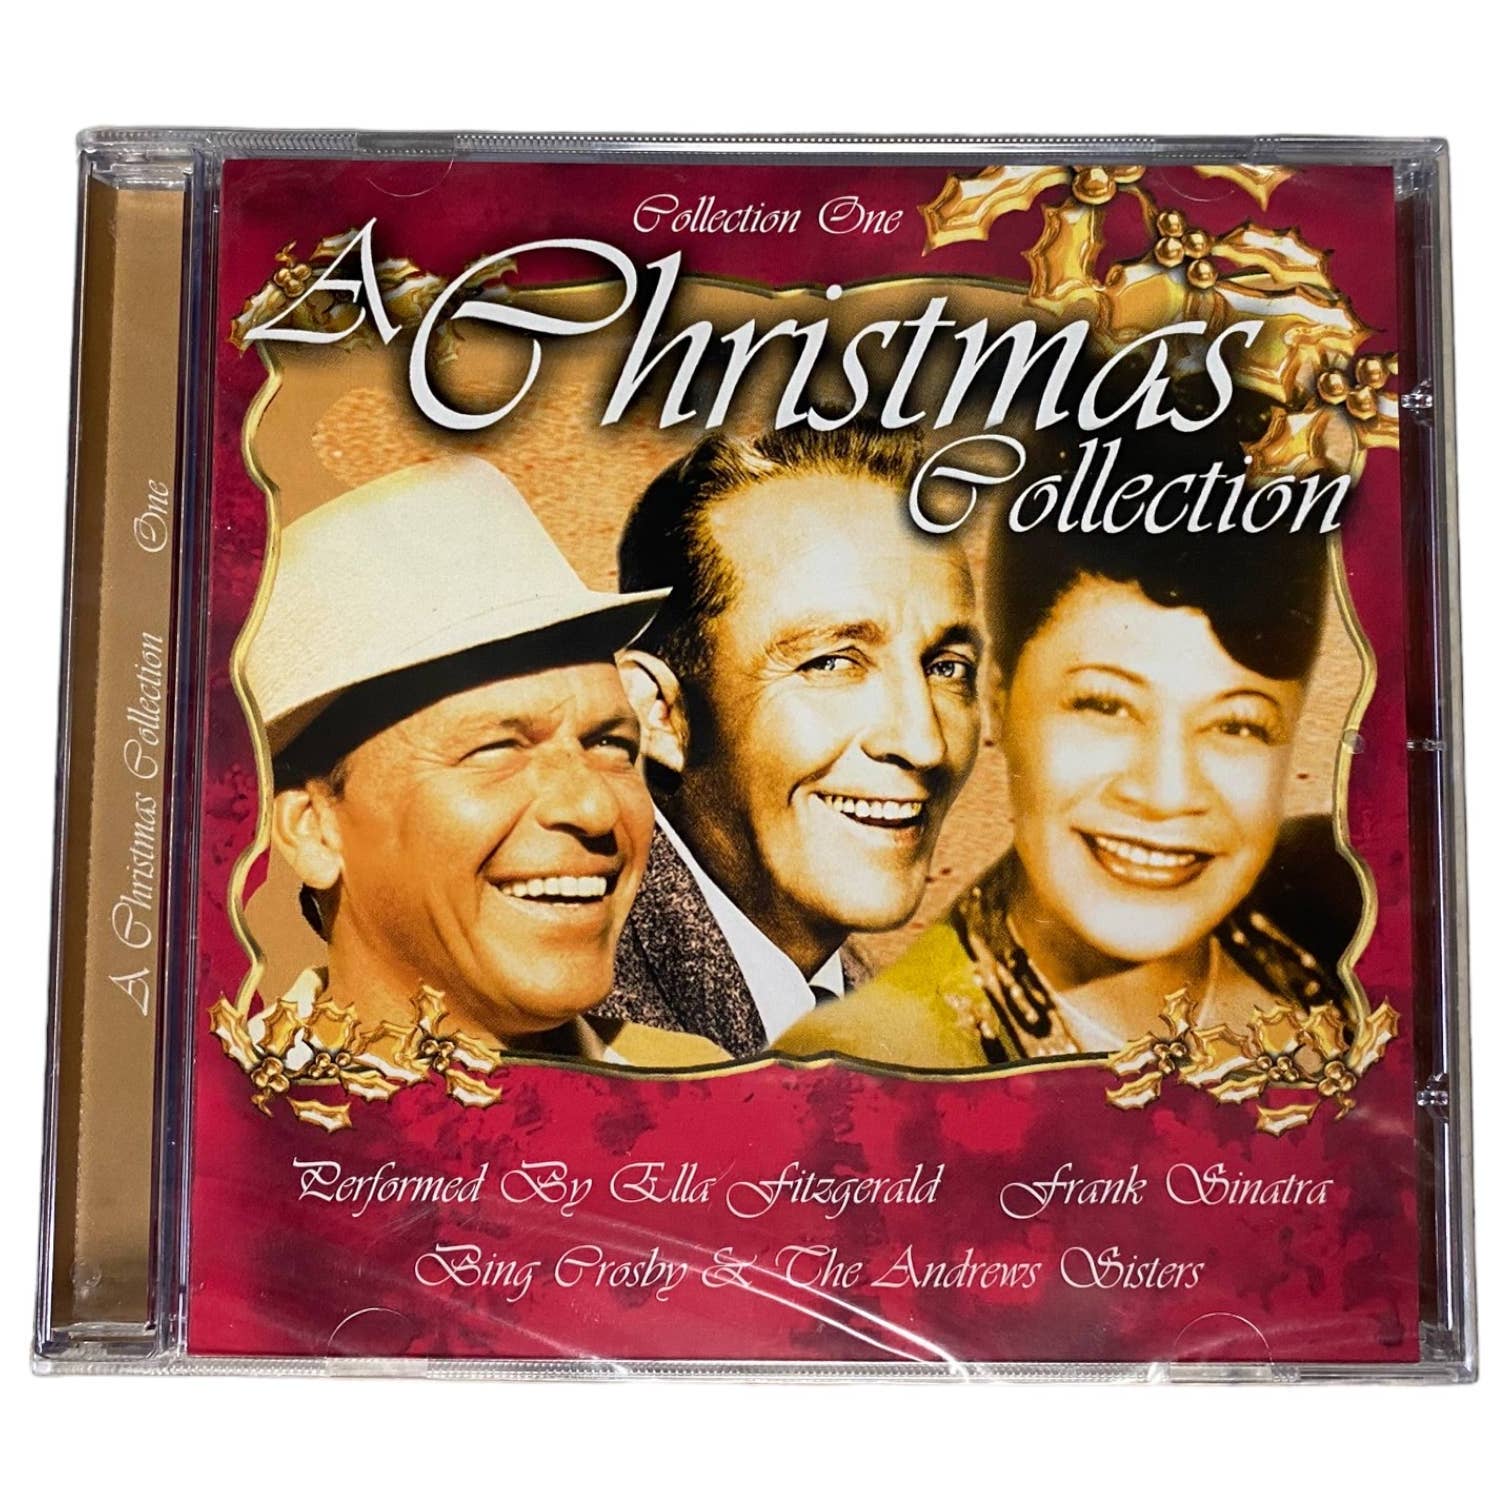 A Christmas Collection (Collection One) Audio CD Crosby Sinatra Fitzgerald Ella